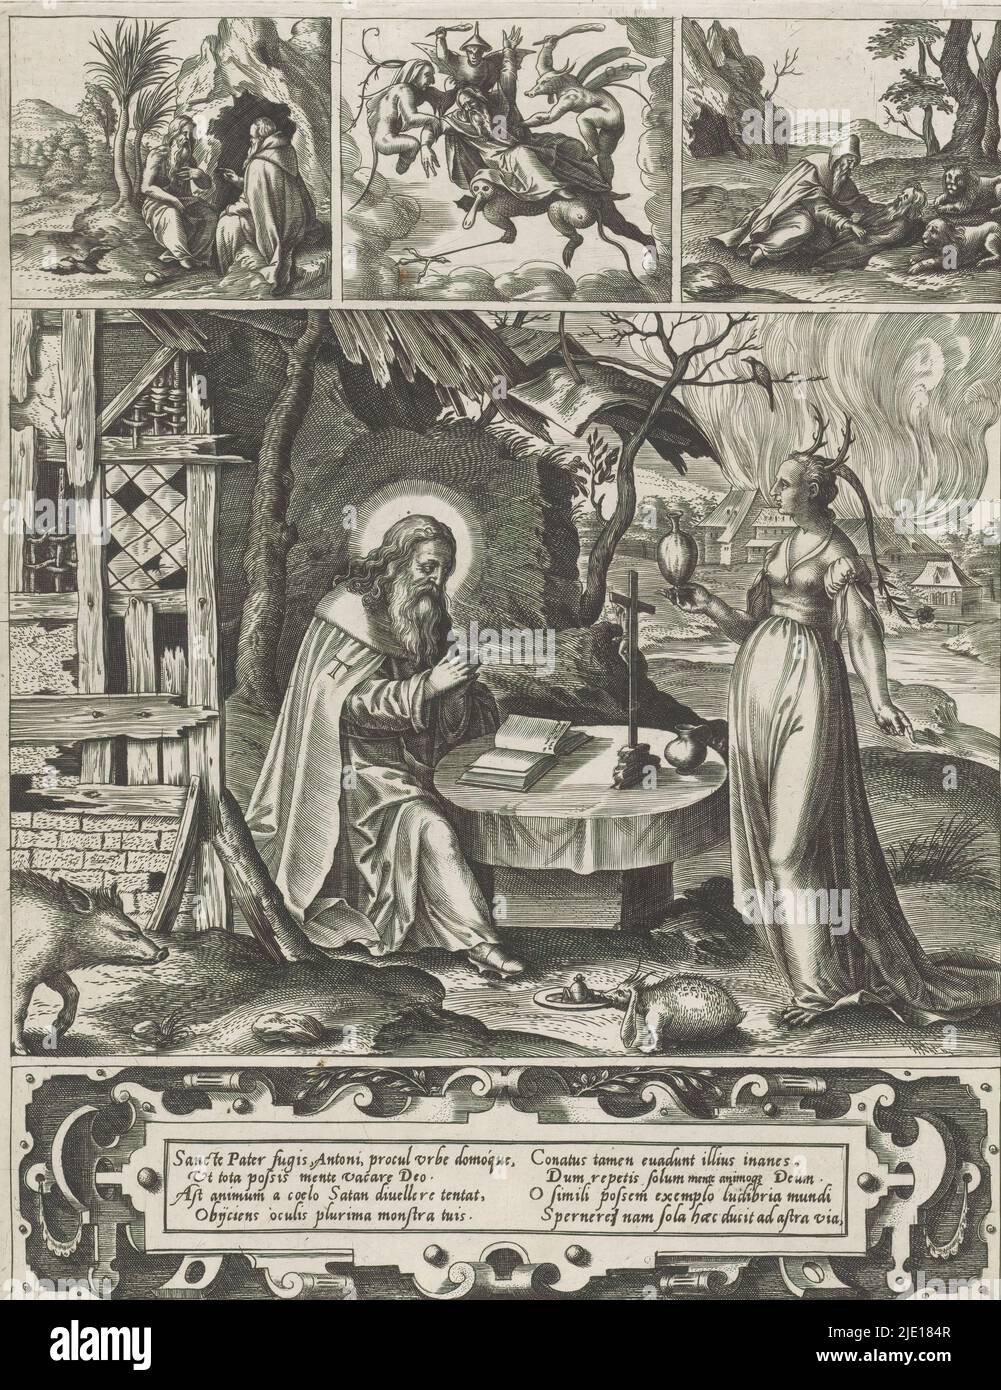 Request of St. Anthony, St. Anthony is kneeling before a hut, at a round table on which is an open book and crucifix. Before him appears a woman with deer antlers and snake tail on her head, a jug in her hand. On the left, the boar. In the background a burning city. At top in three frames three scenes from his life. At bottom a caption in Latin in a cartouche., print maker: Pieter Huys, (attributed to), after own design by: Pieter Huys, Antwerp, c. 1560 - c. 1580, paper, engraving, height 262 mm × width 203 mm Stock Photo